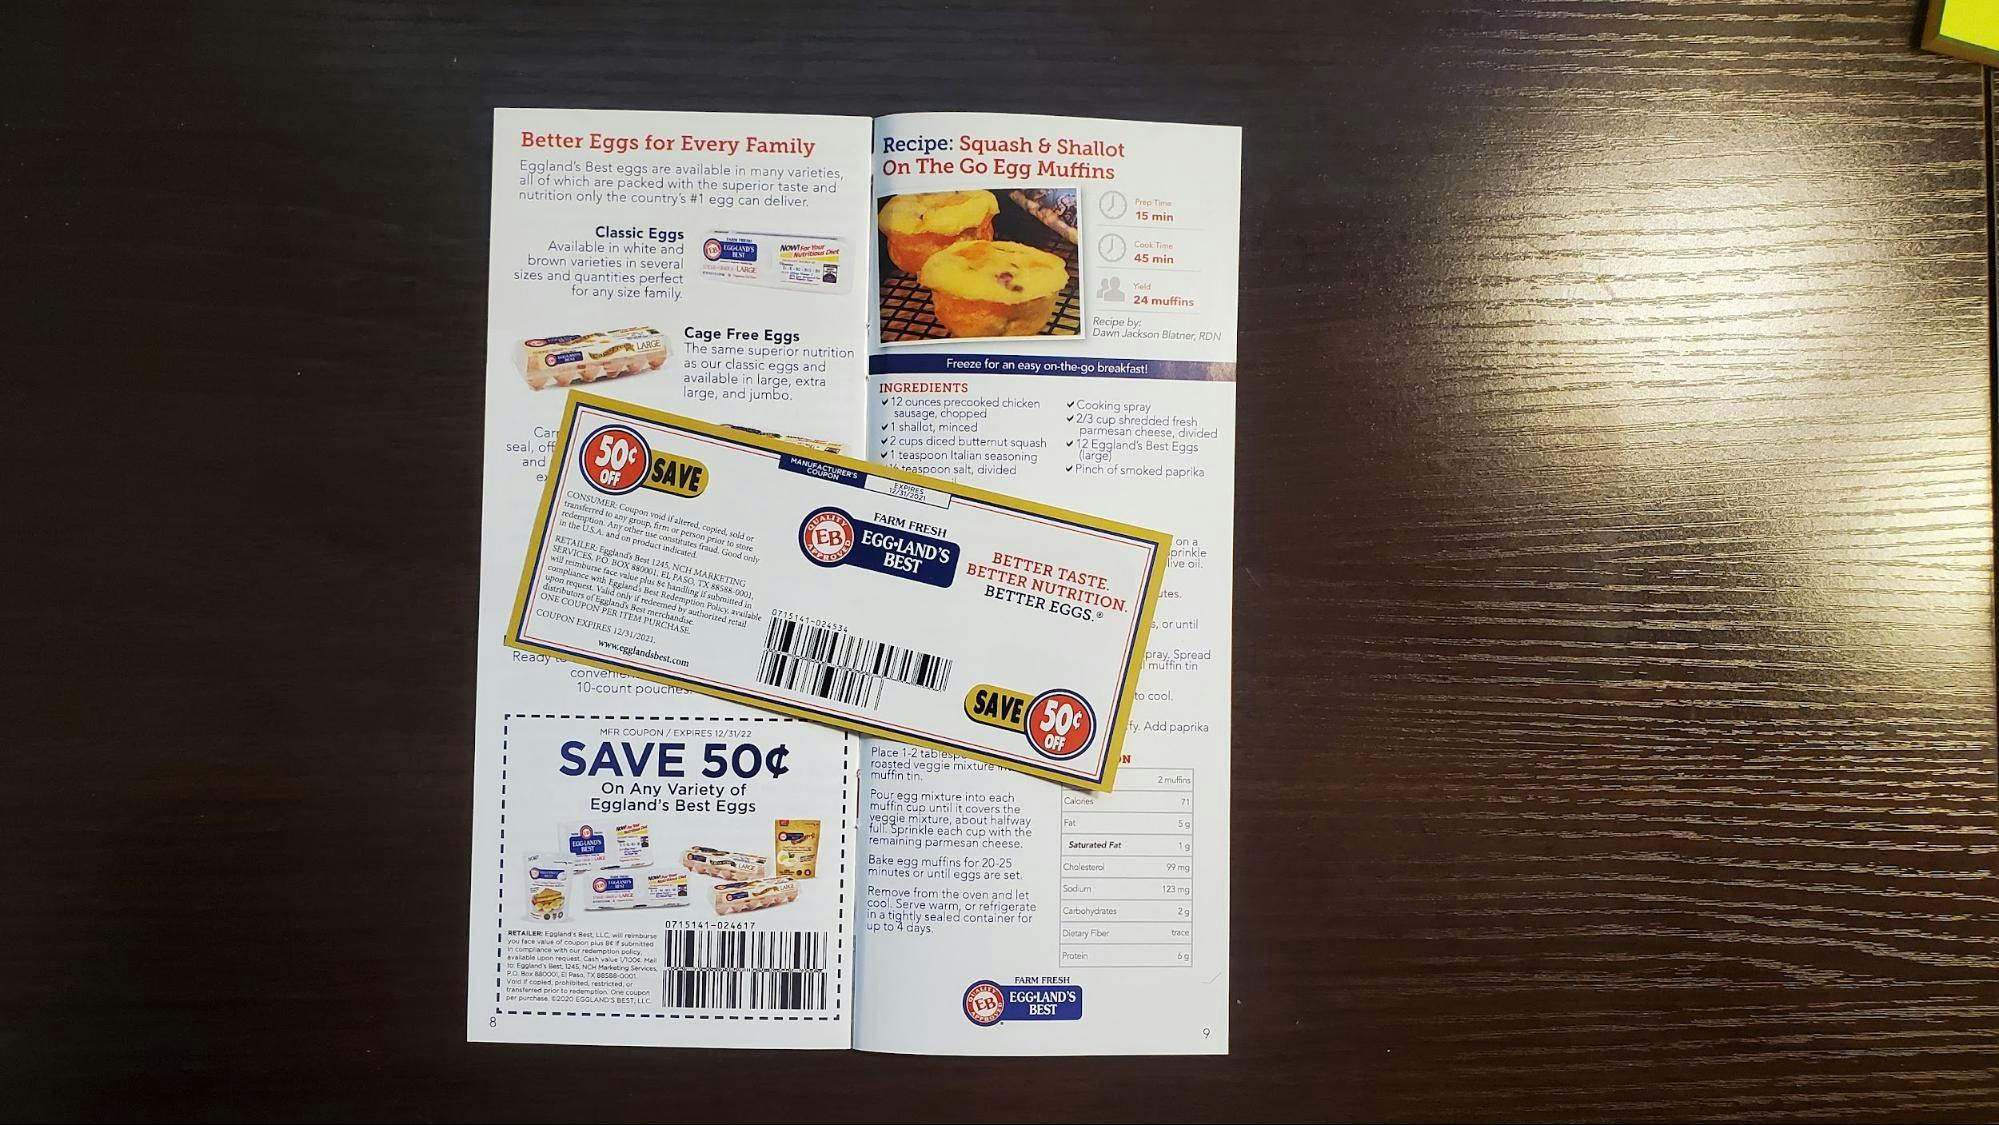 Free Eggland's Best coupons by mail